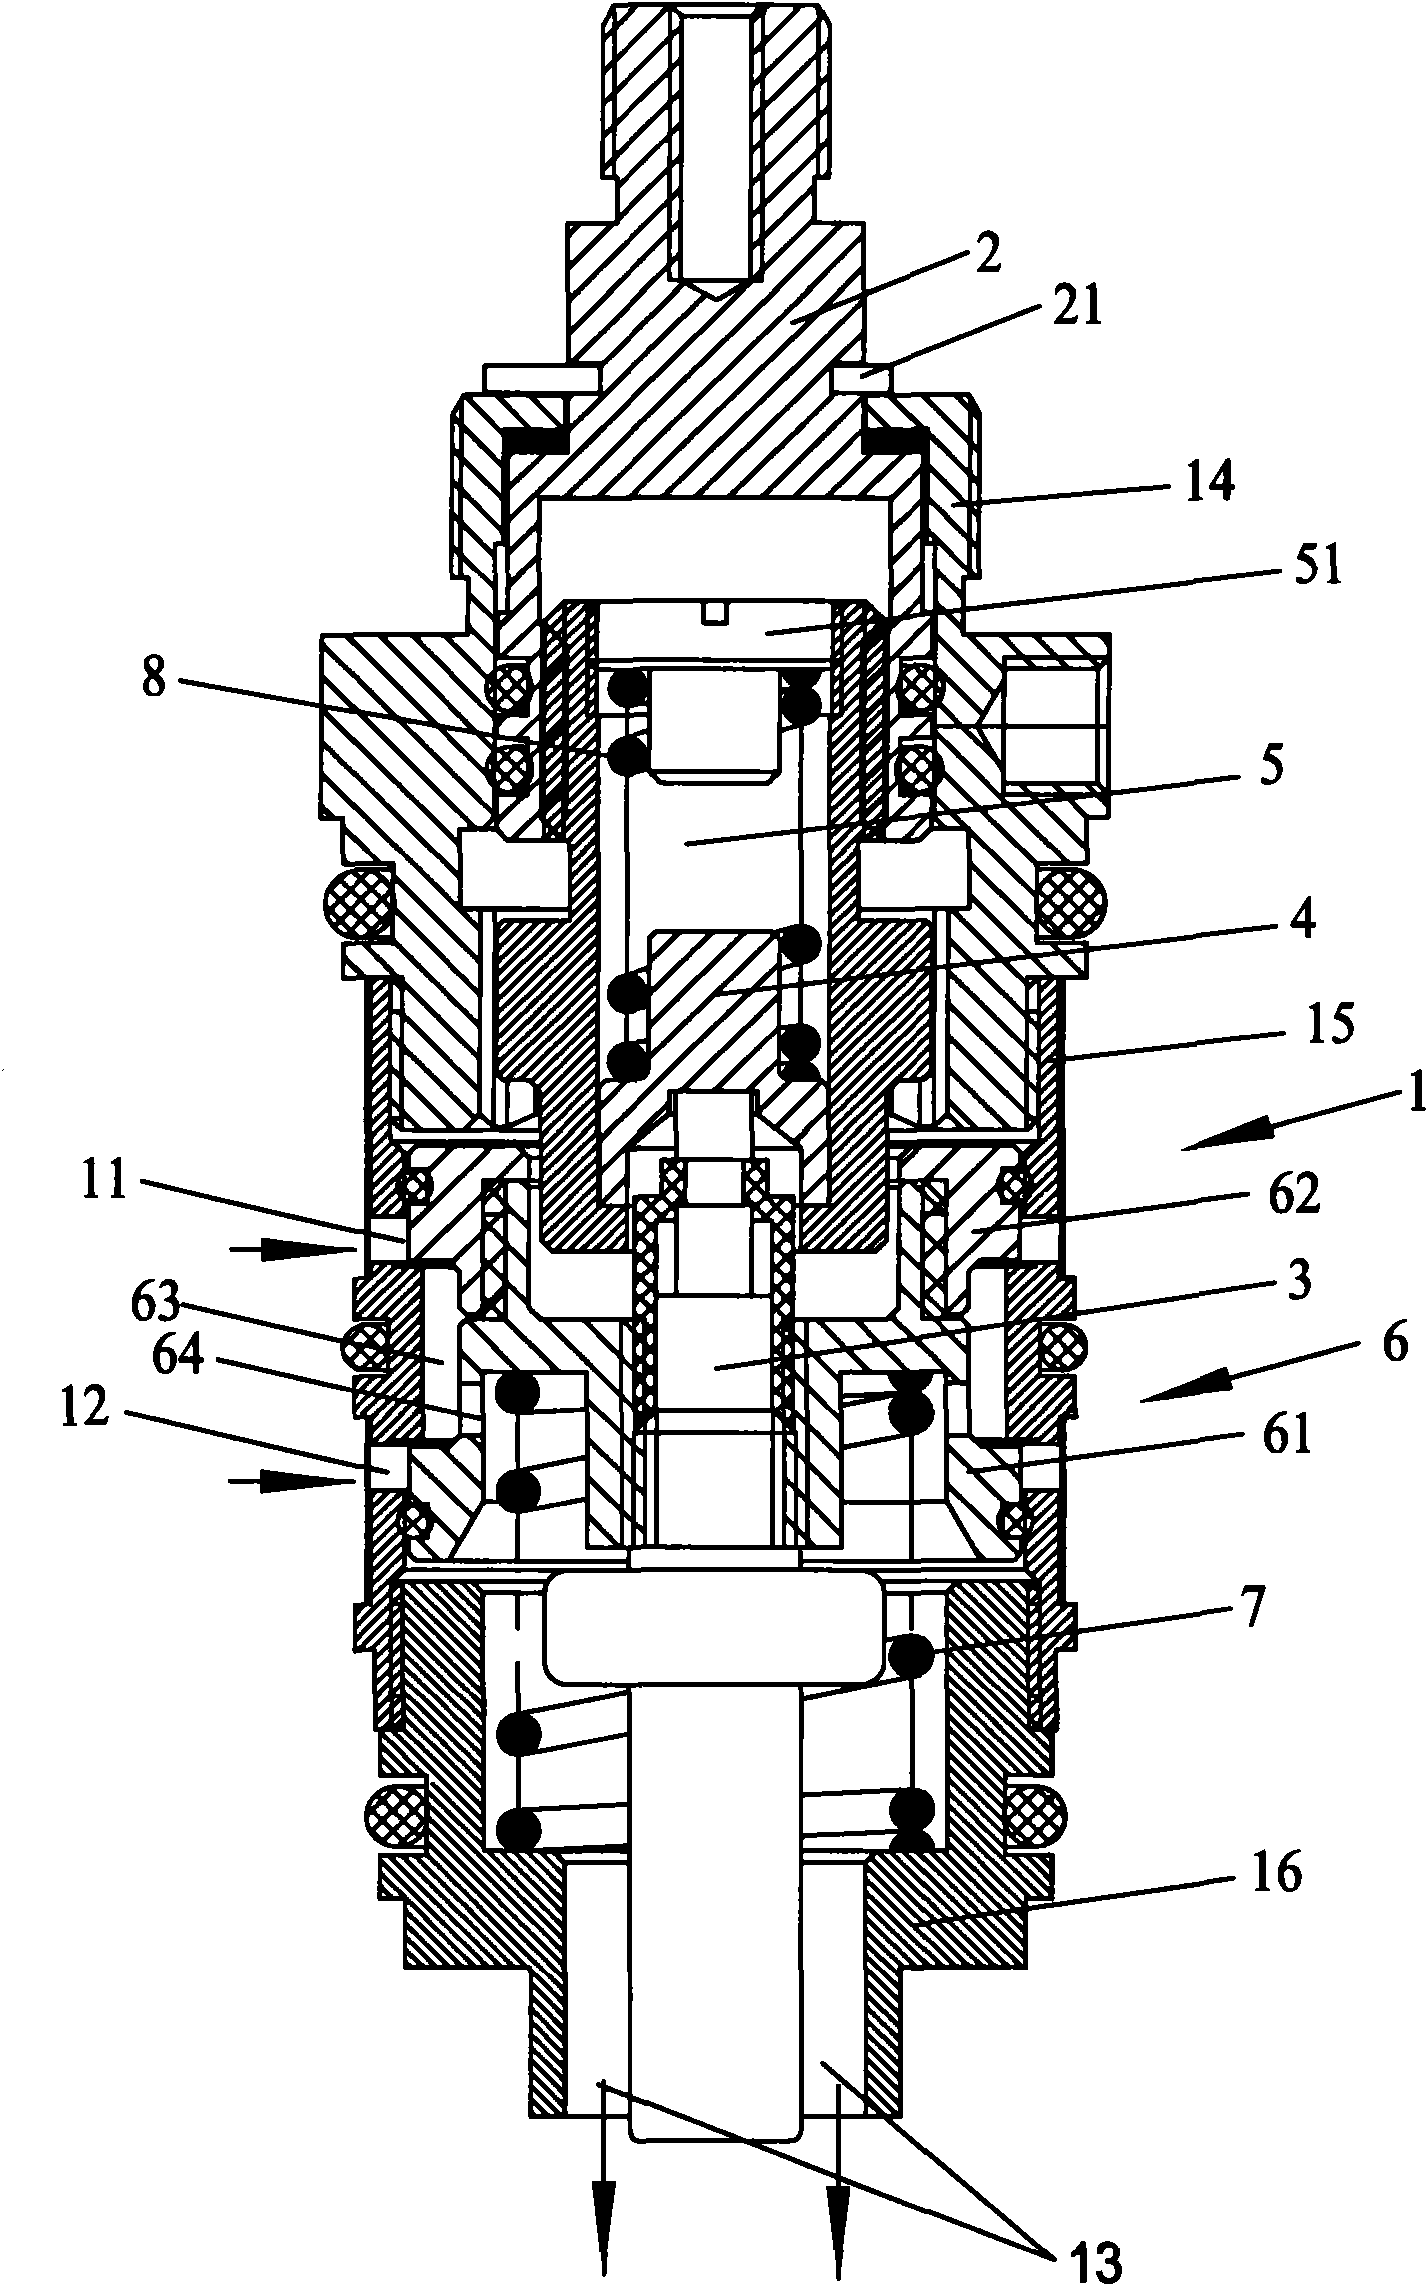 Temperature-sensing valve core with cold water inlet and hot water inlet which are exchanged